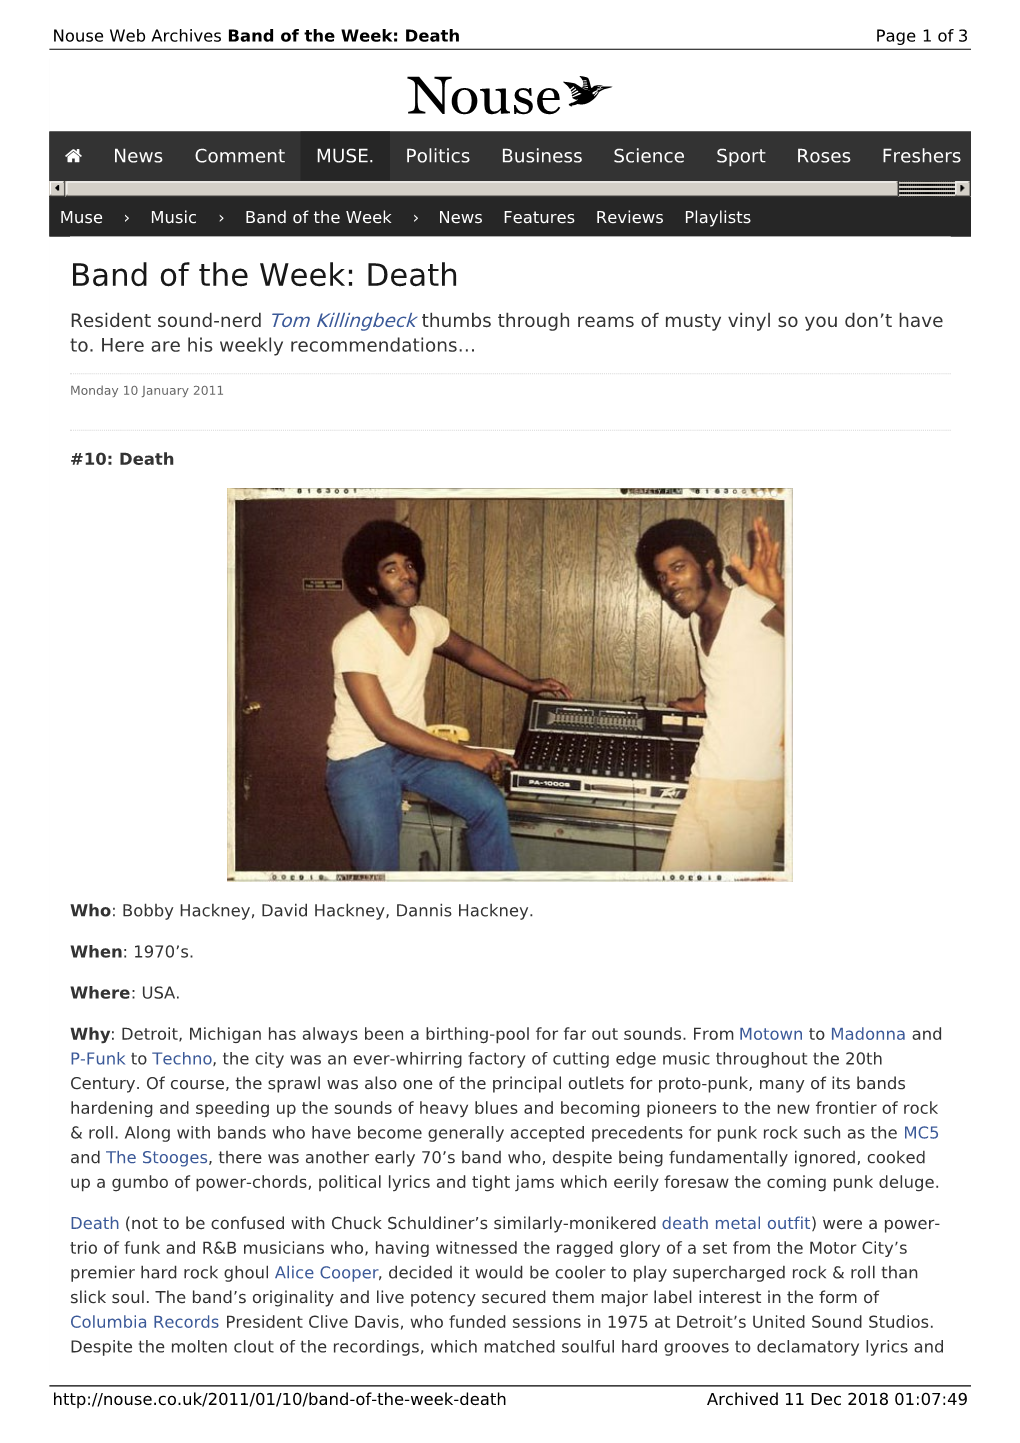 Band of the Week: Death | Nouse